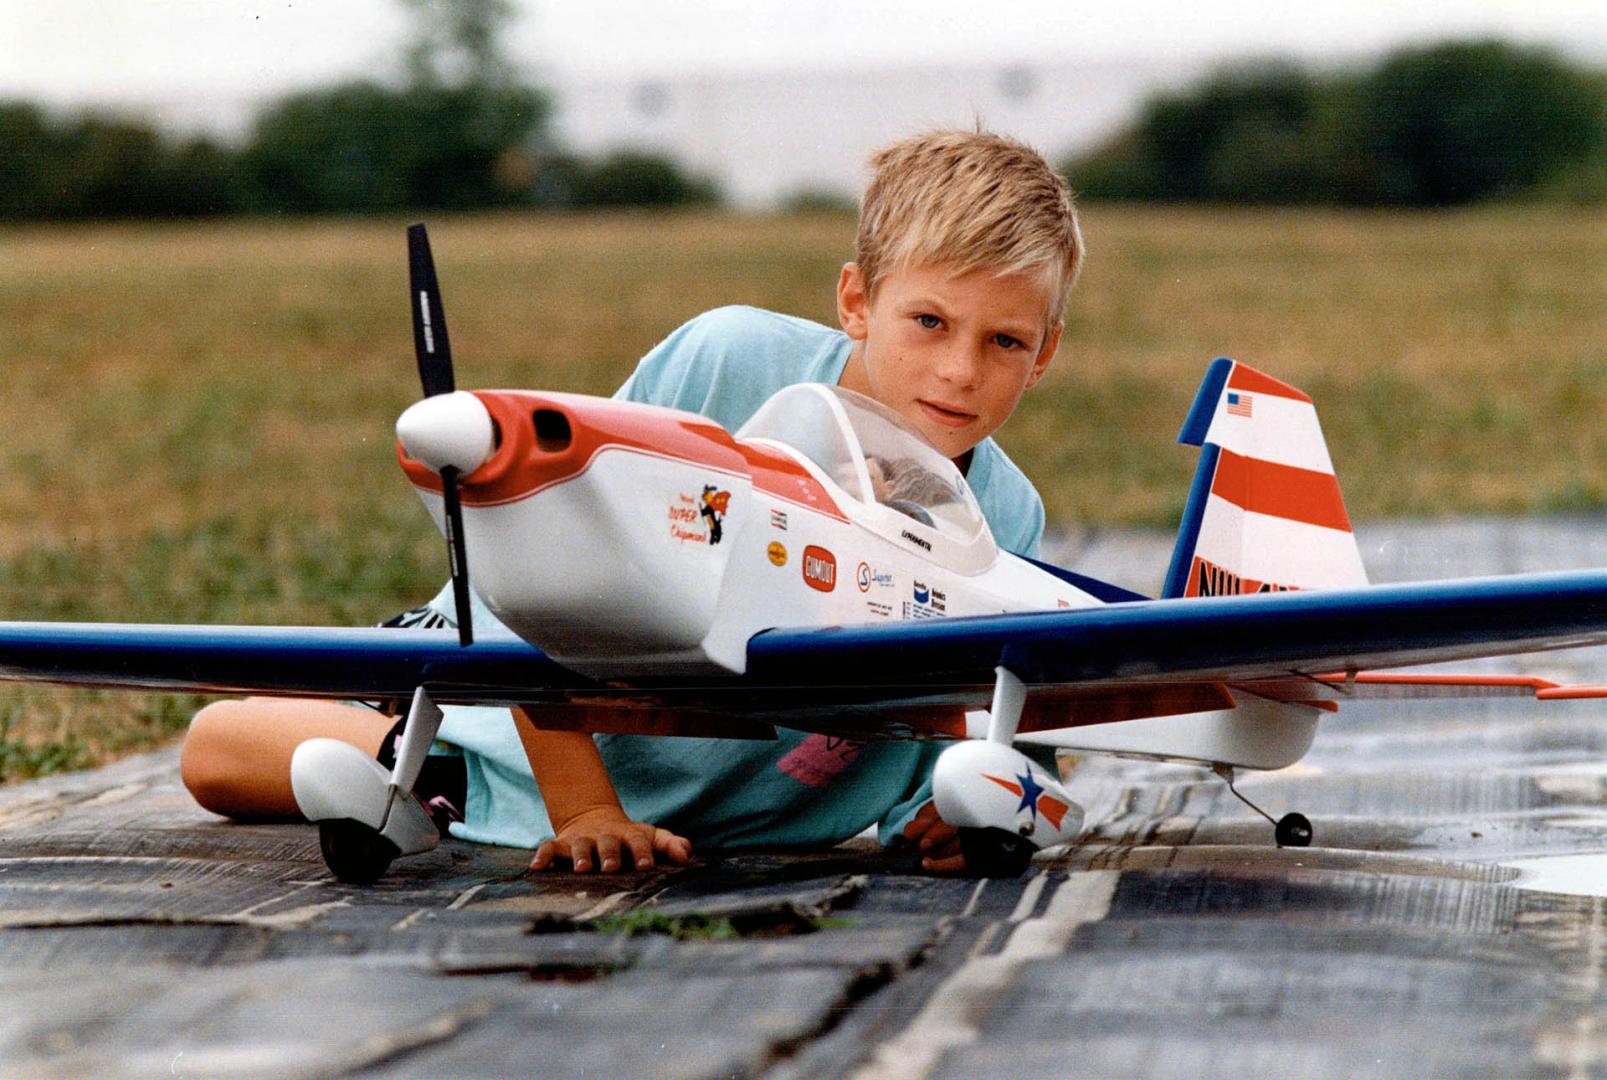 Ryan Hughes of Ajax displays a Super Chipmunk model airplane that he and other members of his family fly